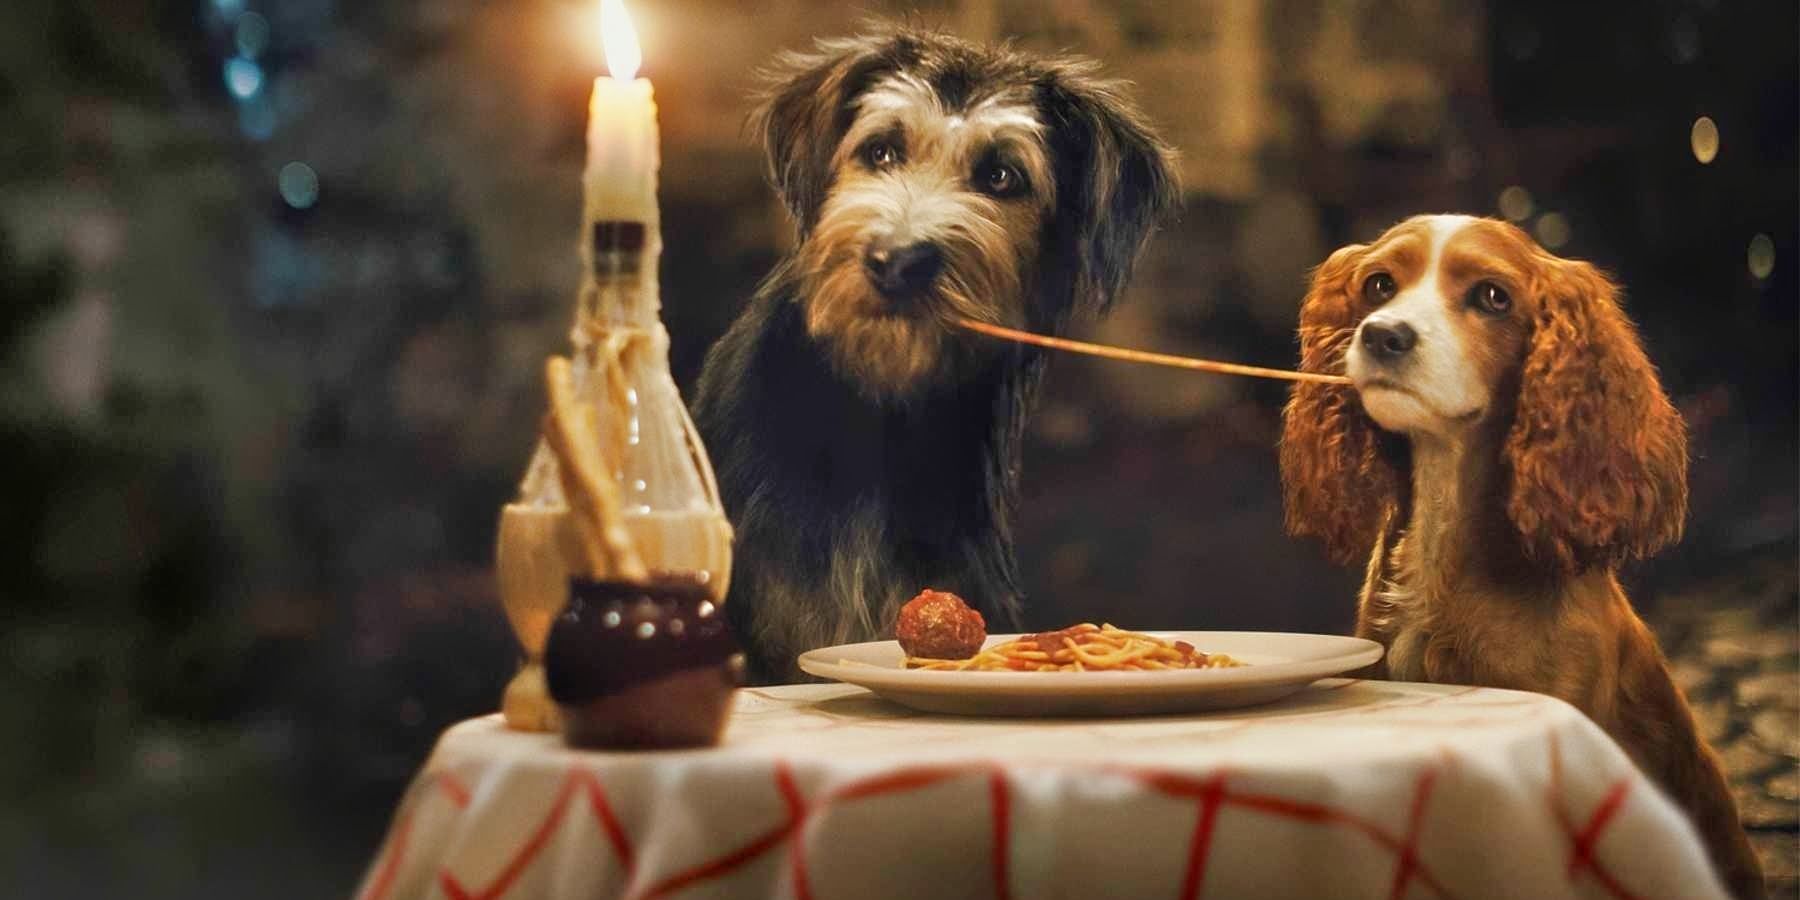 lady and the tramp live action remake